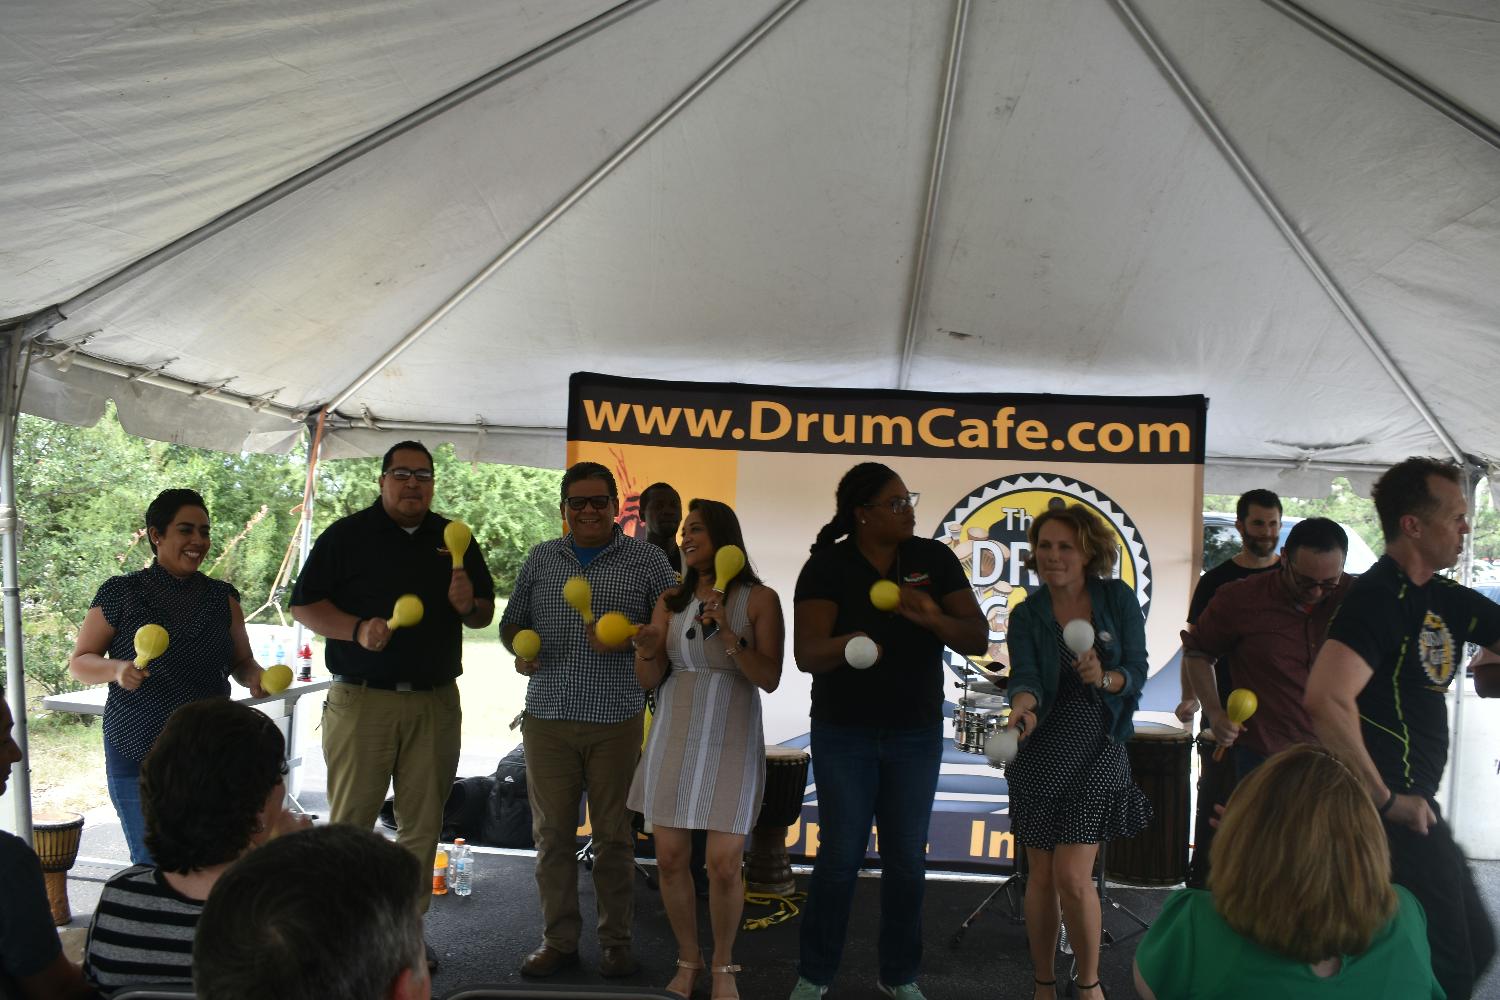 Team building exercises are always fun! Drum Cafe helped us get out of our comfort zone and shimmy to the beat.